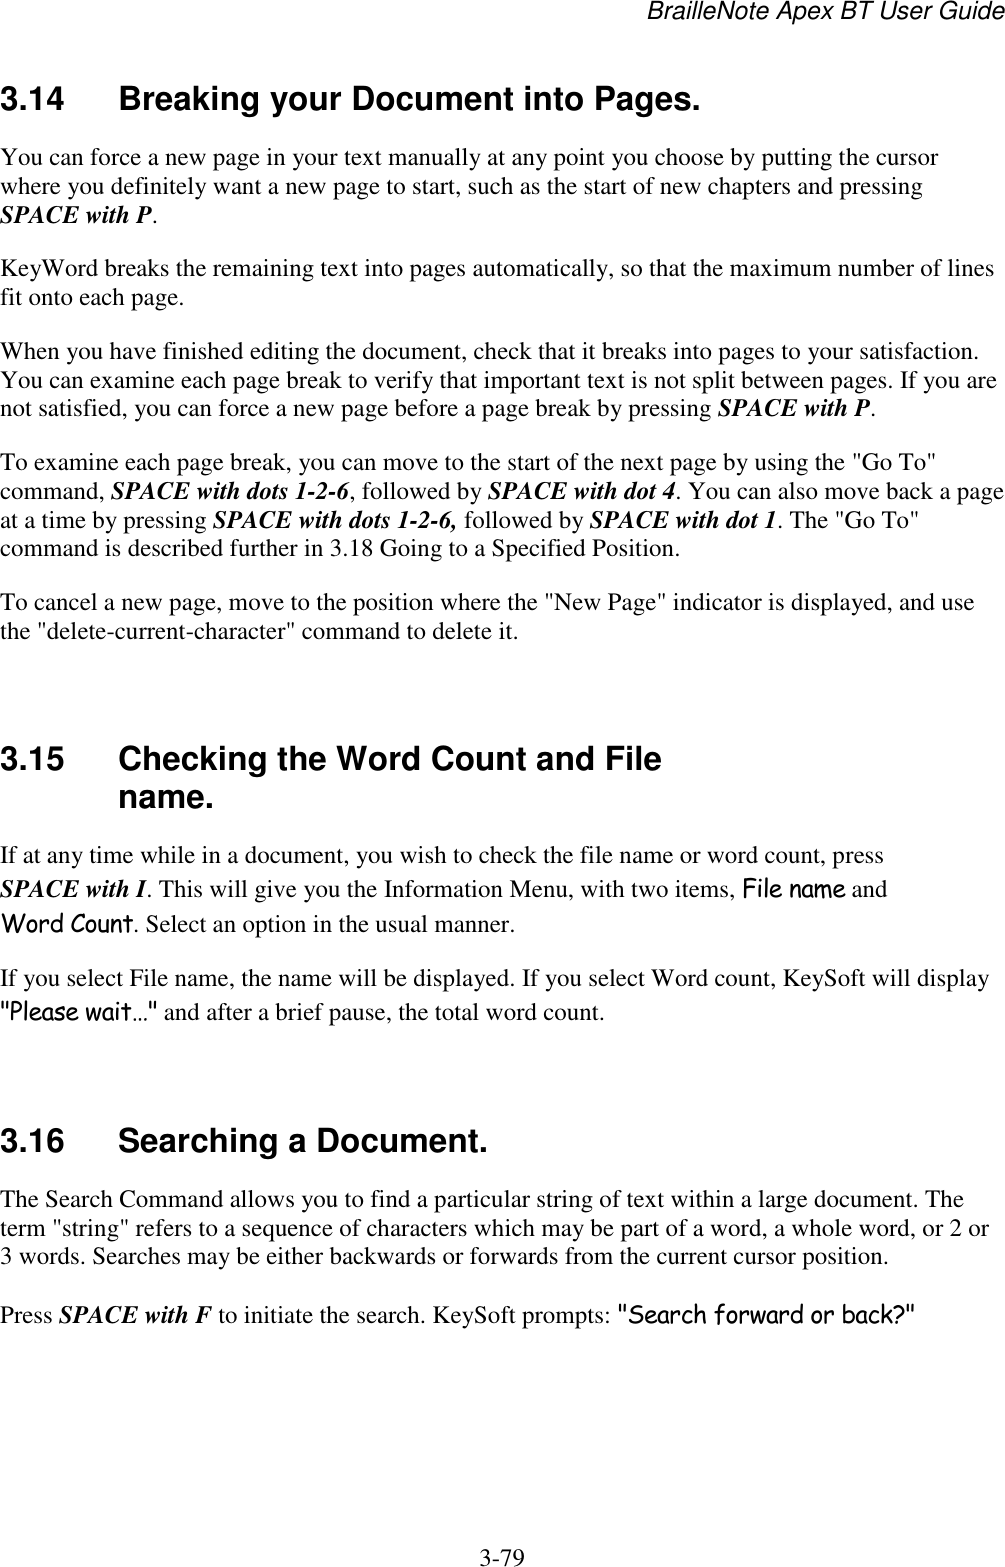 BrailleNote Apex BT User Guide   3-79   3.14  Breaking your Document into Pages. You can force a new page in your text manually at any point you choose by putting the cursor where you definitely want a new page to start, such as the start of new chapters and pressing SPACE with P. KeyWord breaks the remaining text into pages automatically, so that the maximum number of lines fit onto each page. When you have finished editing the document, check that it breaks into pages to your satisfaction. You can examine each page break to verify that important text is not split between pages. If you are not satisfied, you can force a new page before a page break by pressing SPACE with P. To examine each page break, you can move to the start of the next page by using the &quot;Go To&quot; command, SPACE with dots 1-2-6, followed by SPACE with dot 4. You can also move back a page at a time by pressing SPACE with dots 1-2-6, followed by SPACE with dot 1. The &quot;Go To&quot; command is described further in 3.18 Going to a Specified Position. To cancel a new page, move to the position where the &quot;New Page&quot; indicator is displayed, and use the &quot;delete-current-character&quot; command to delete it.   3.15  Checking the Word Count and File name. If at any time while in a document, you wish to check the file name or word count, press SPACE with I. This will give you the Information Menu, with two items, File name and Word Count. Select an option in the usual manner. If you select File name, the name will be displayed. If you select Word count, KeySoft will display &quot;Please wait…&quot; and after a brief pause, the total word count.   3.16  Searching a Document. The Search Command allows you to find a particular string of text within a large document. The term &quot;string&quot; refers to a sequence of characters which may be part of a word, a whole word, or 2 or 3 words. Searches may be either backwards or forwards from the current cursor position. Press SPACE with F to initiate the search. KeySoft prompts: &quot;Search forward or back?&quot;   